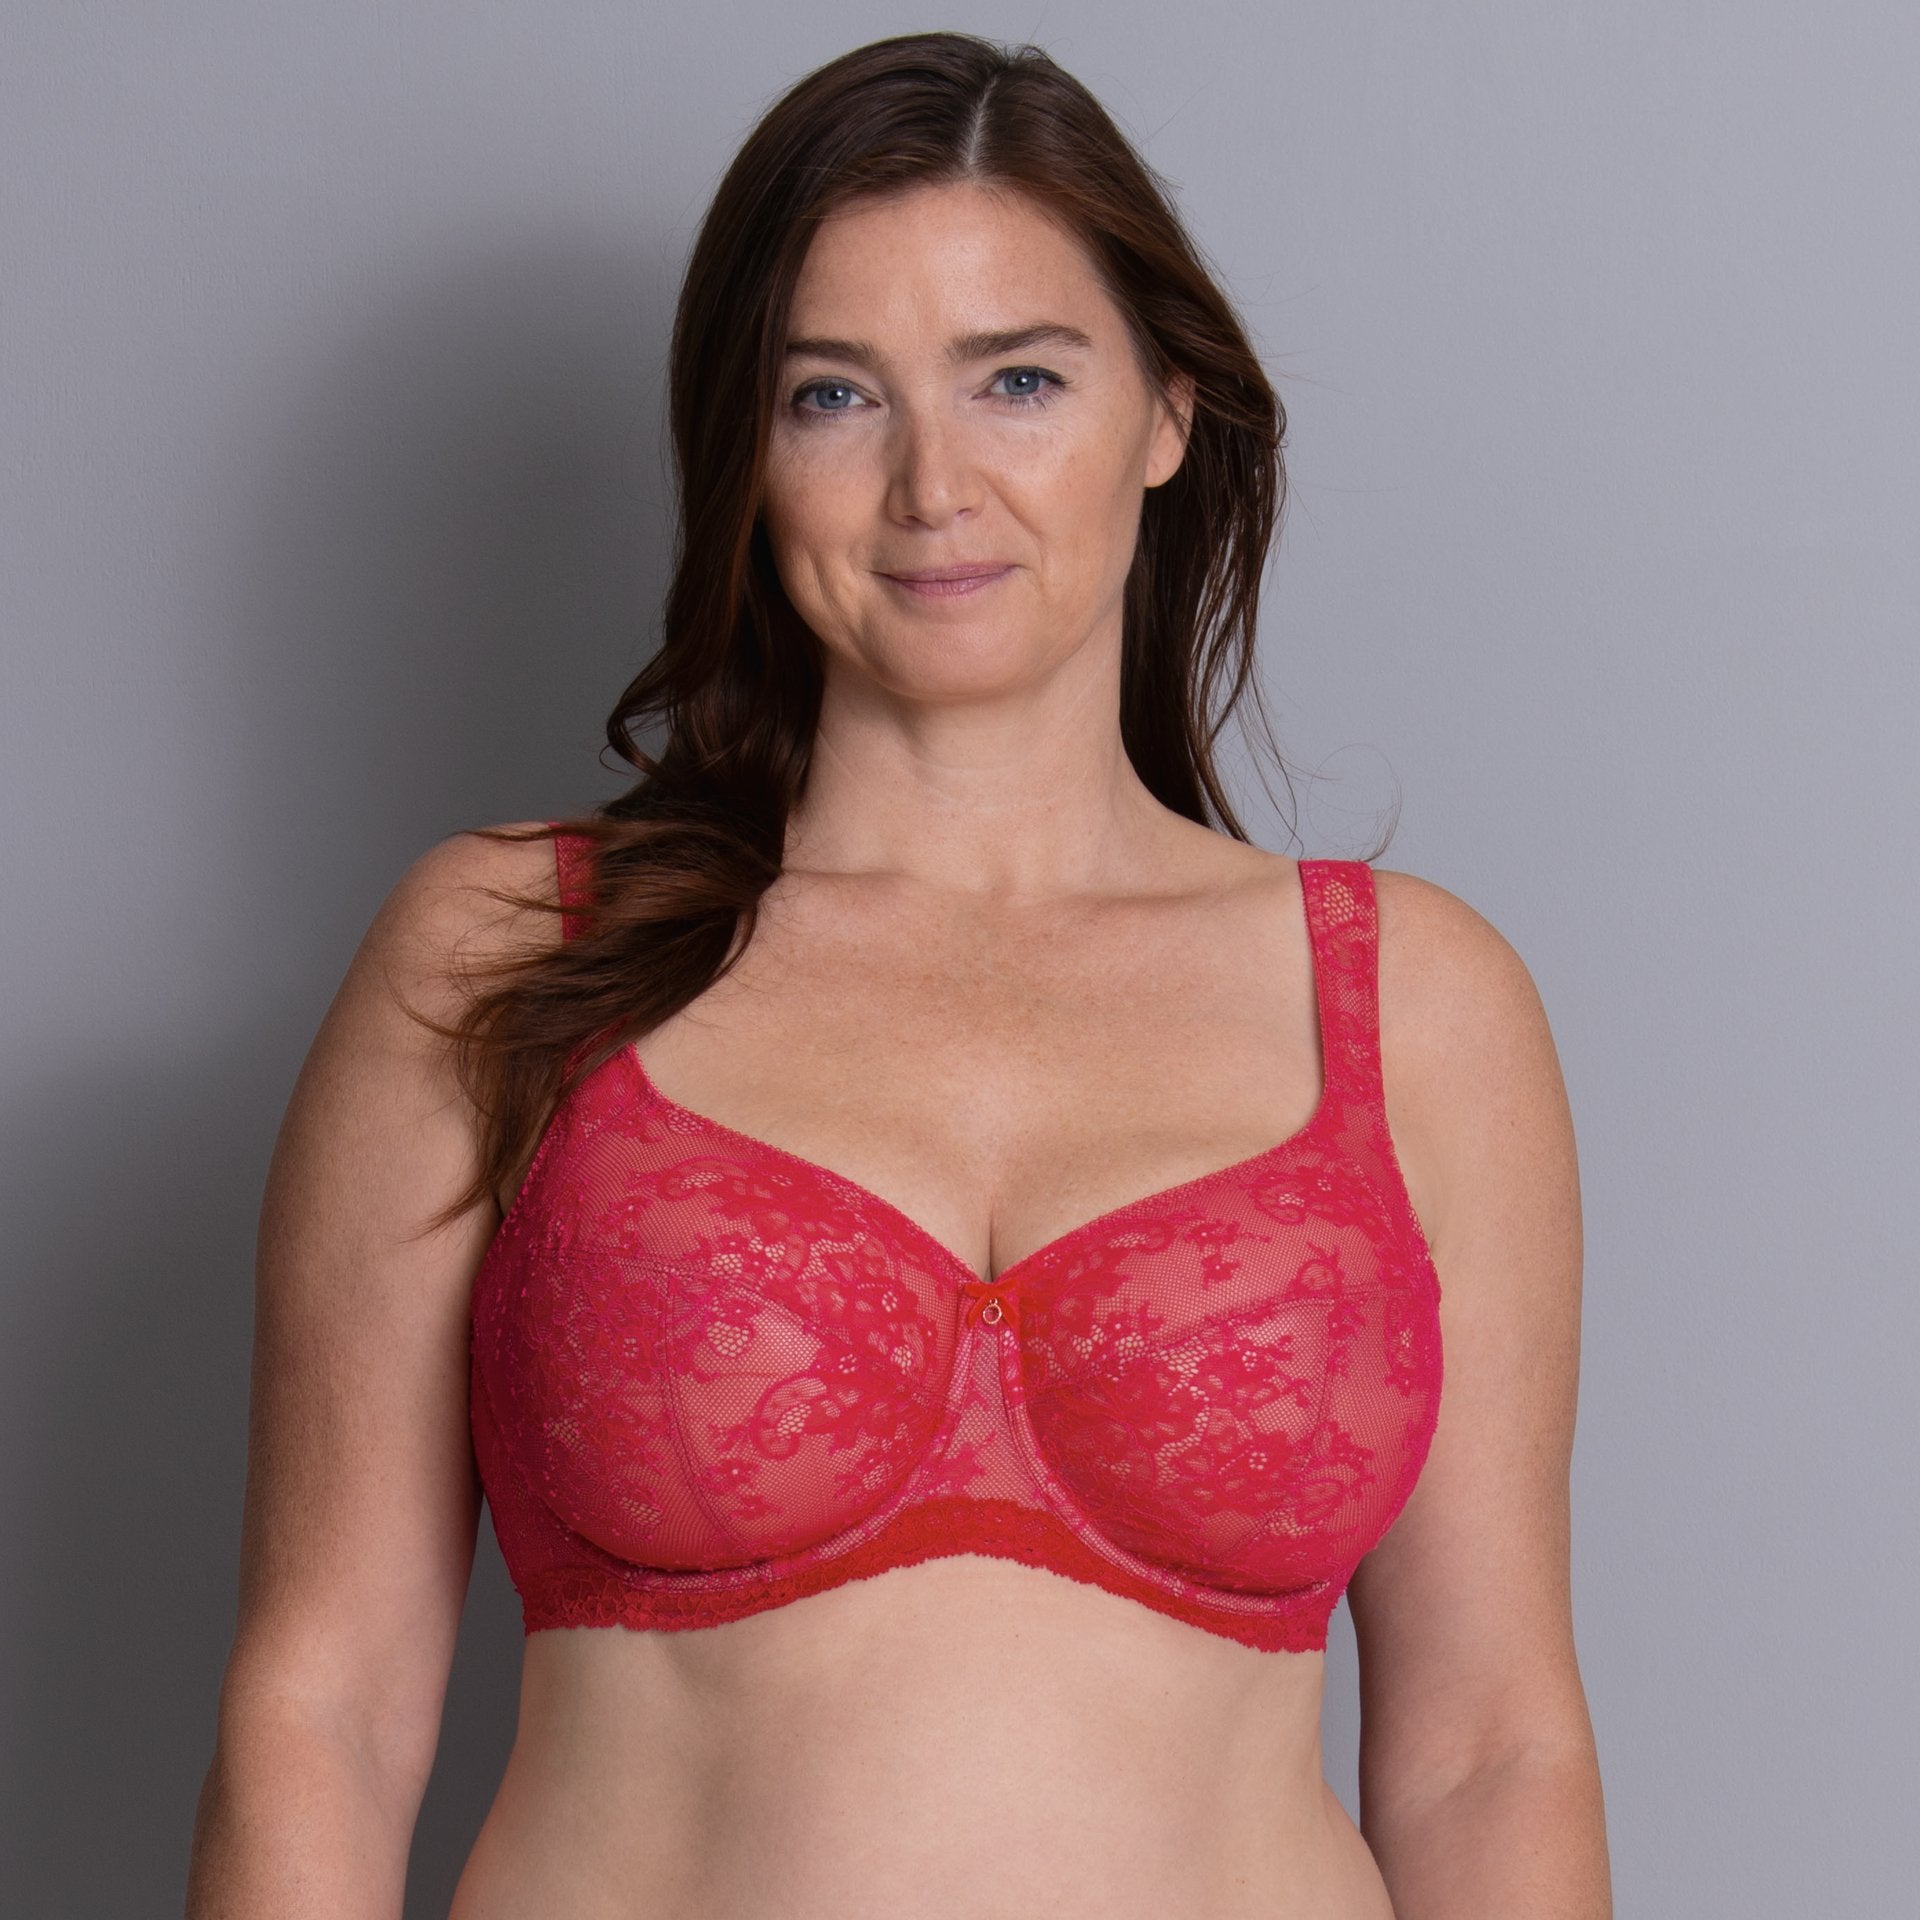 32G Bra Size in Cherry Abby by Anita Multi Section Cups and Three Section Cup  Bras